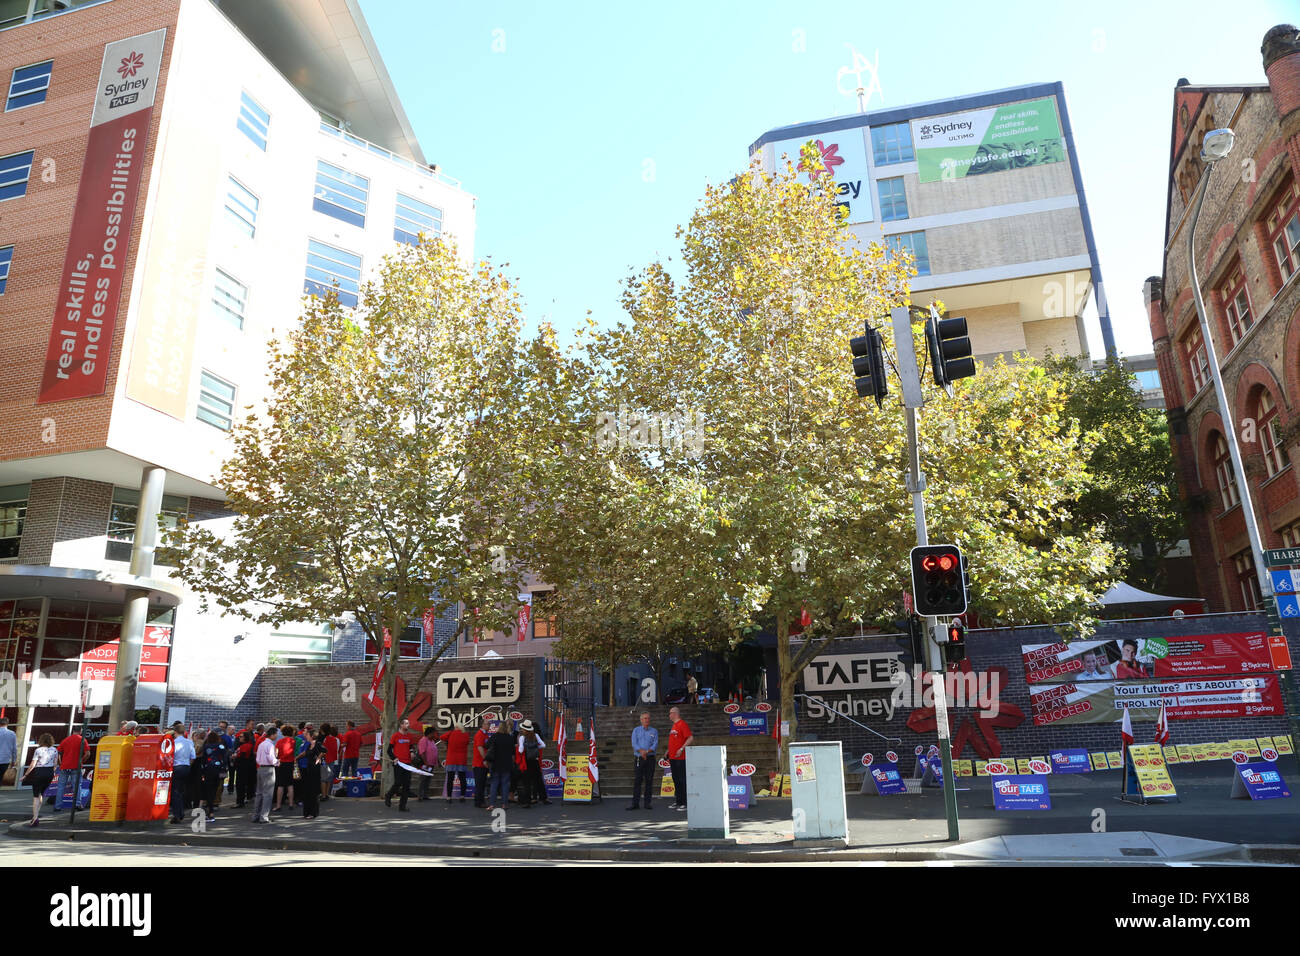 Sydney, Australia. 28 April 2016. Staff in TAFE colleges across the state who are members of the Public Service Association (PSA) are stopping work for three hours on the afternoon of Thursday 28 April to protest against proposed cuts to working conditions. Pictured is the main rally at Ultimo College of TAFE, Sydney (Harris Street entrance). Credit: Richard Milnes/Alamy Live News. Stock Photo